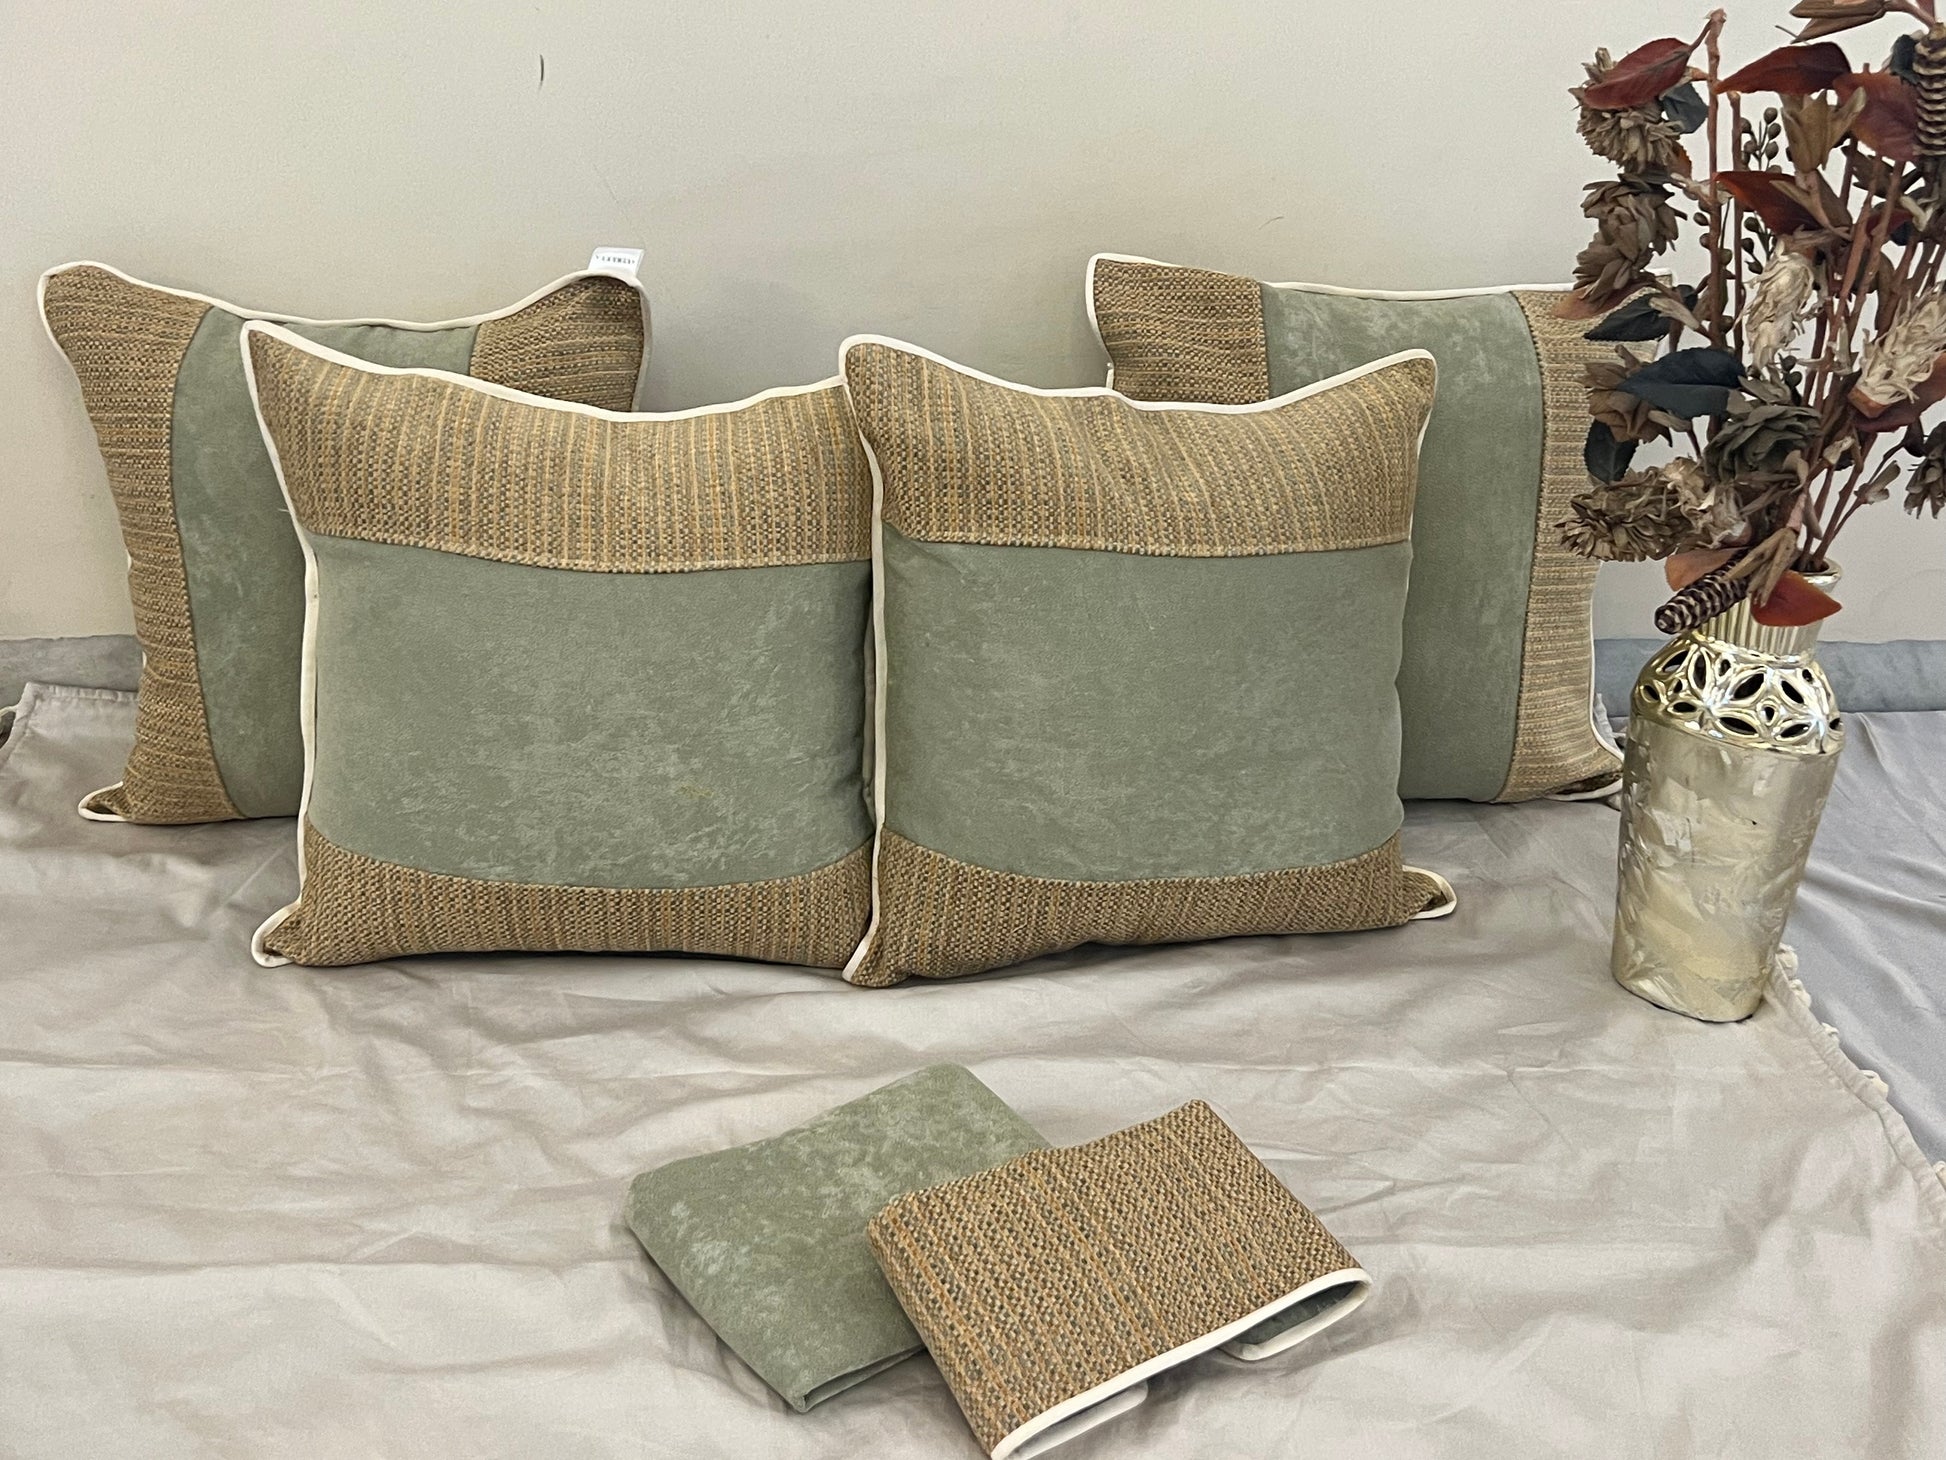 Sand Lane Cushion Cover Sets at Kamakhyaa by Aetherea. This item is Beige, Cotton, Cushion covers, Half & Half, Home, Mint, Texture, Upcycled